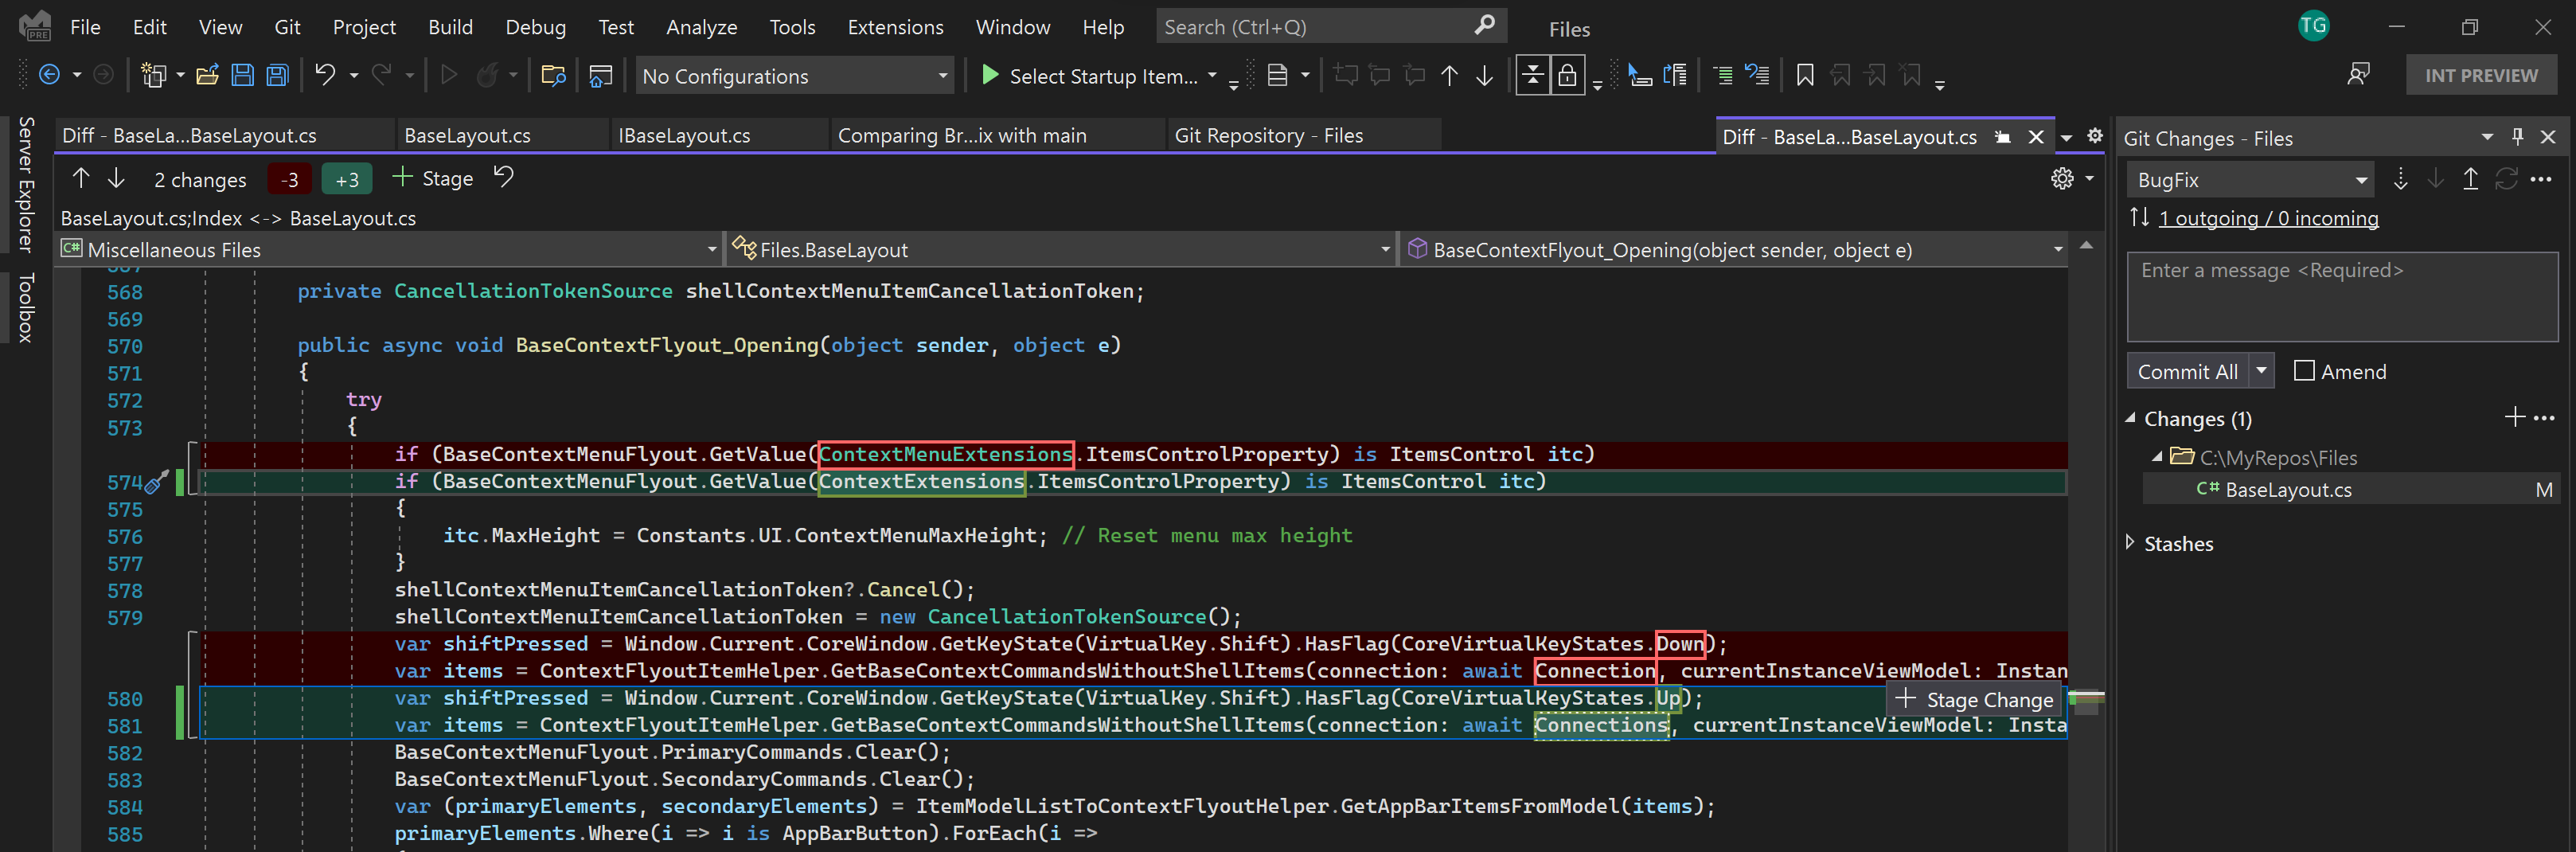 Screenshot demonstrating Visual Studio's Line-staging preview functionality